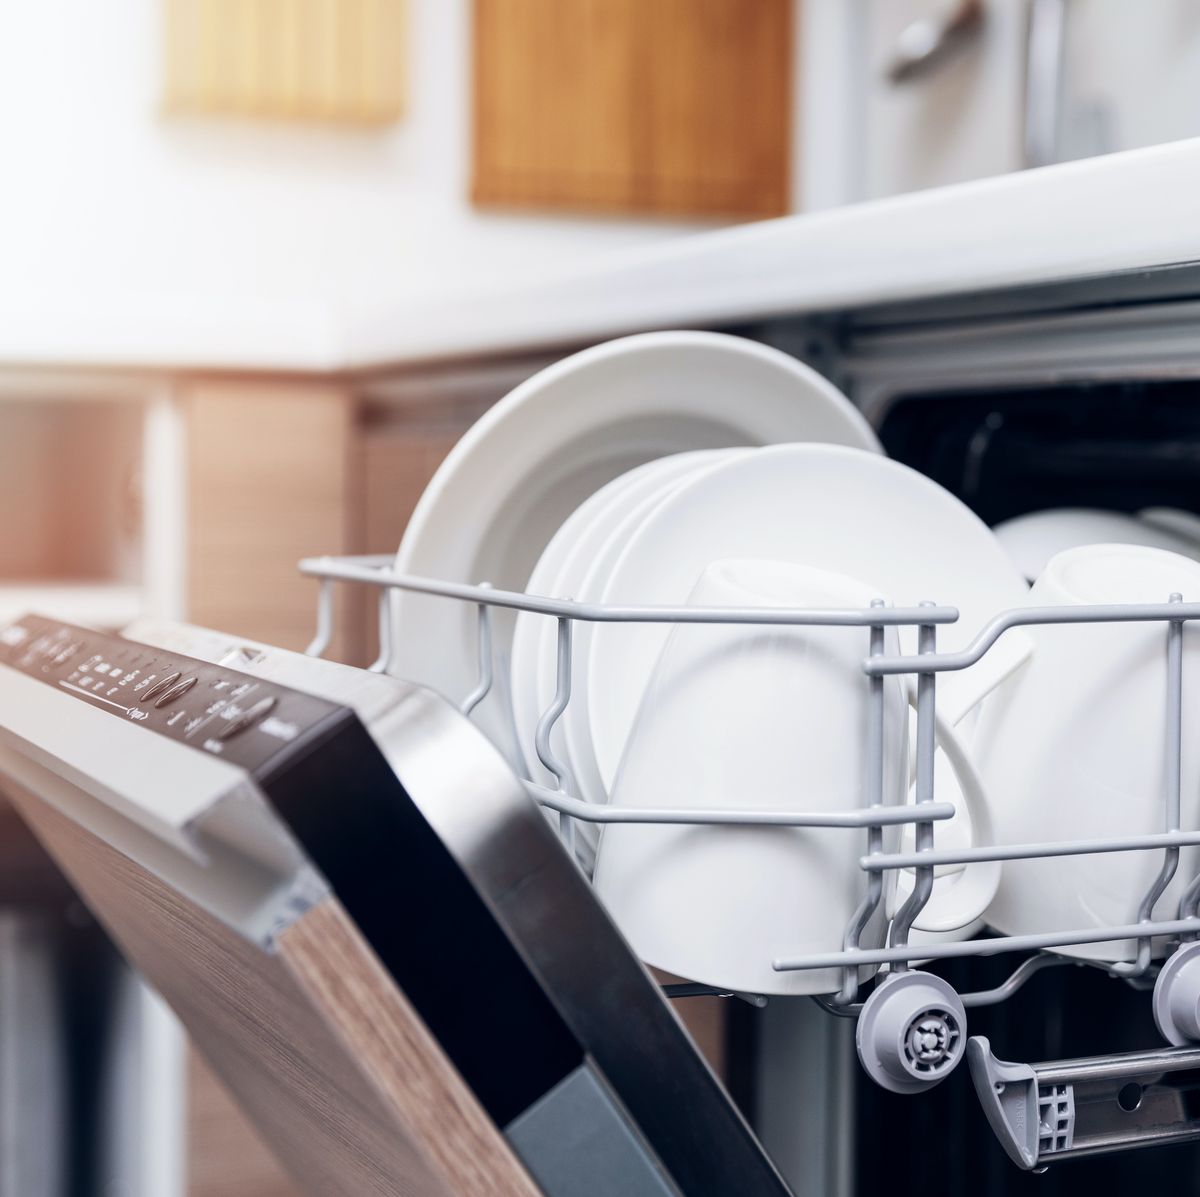 5 common dishwasher mistakes you are making, according to an expert